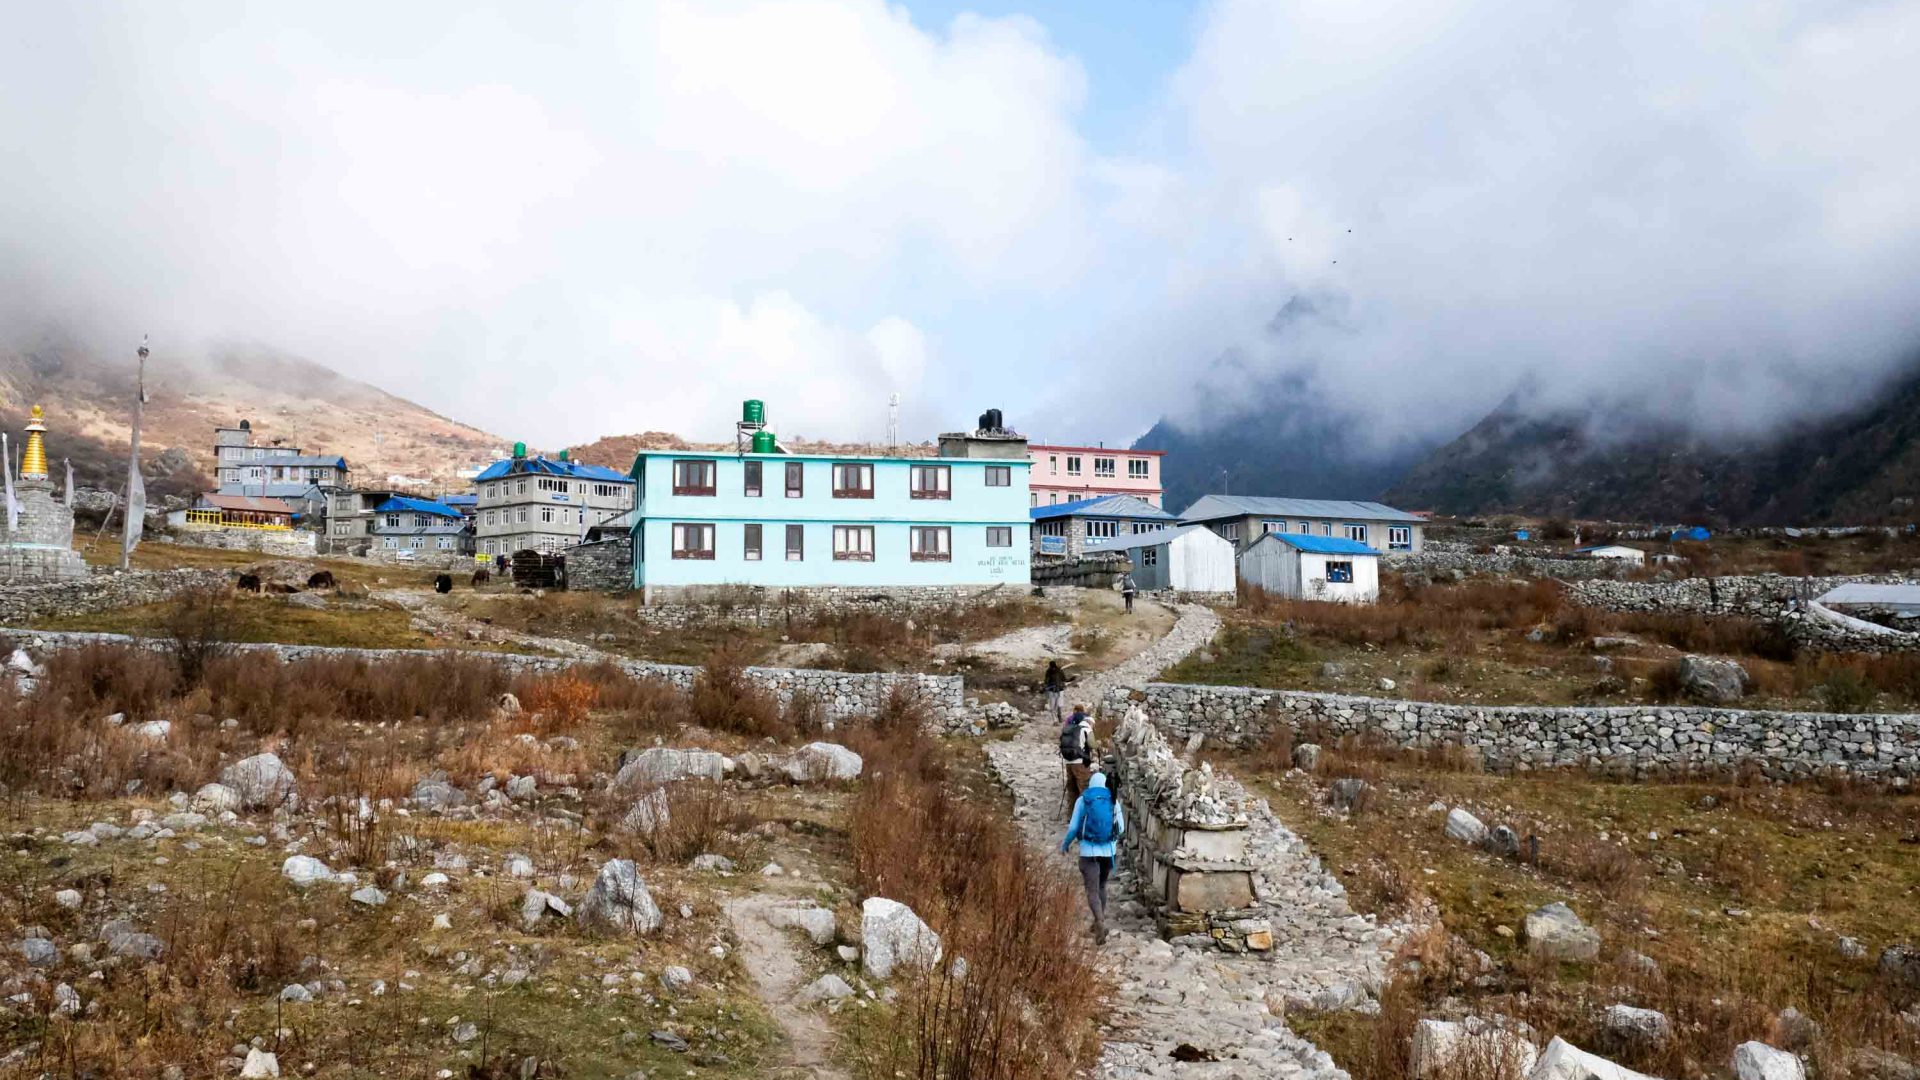 Hikers walk up to the coloured houses in the village.